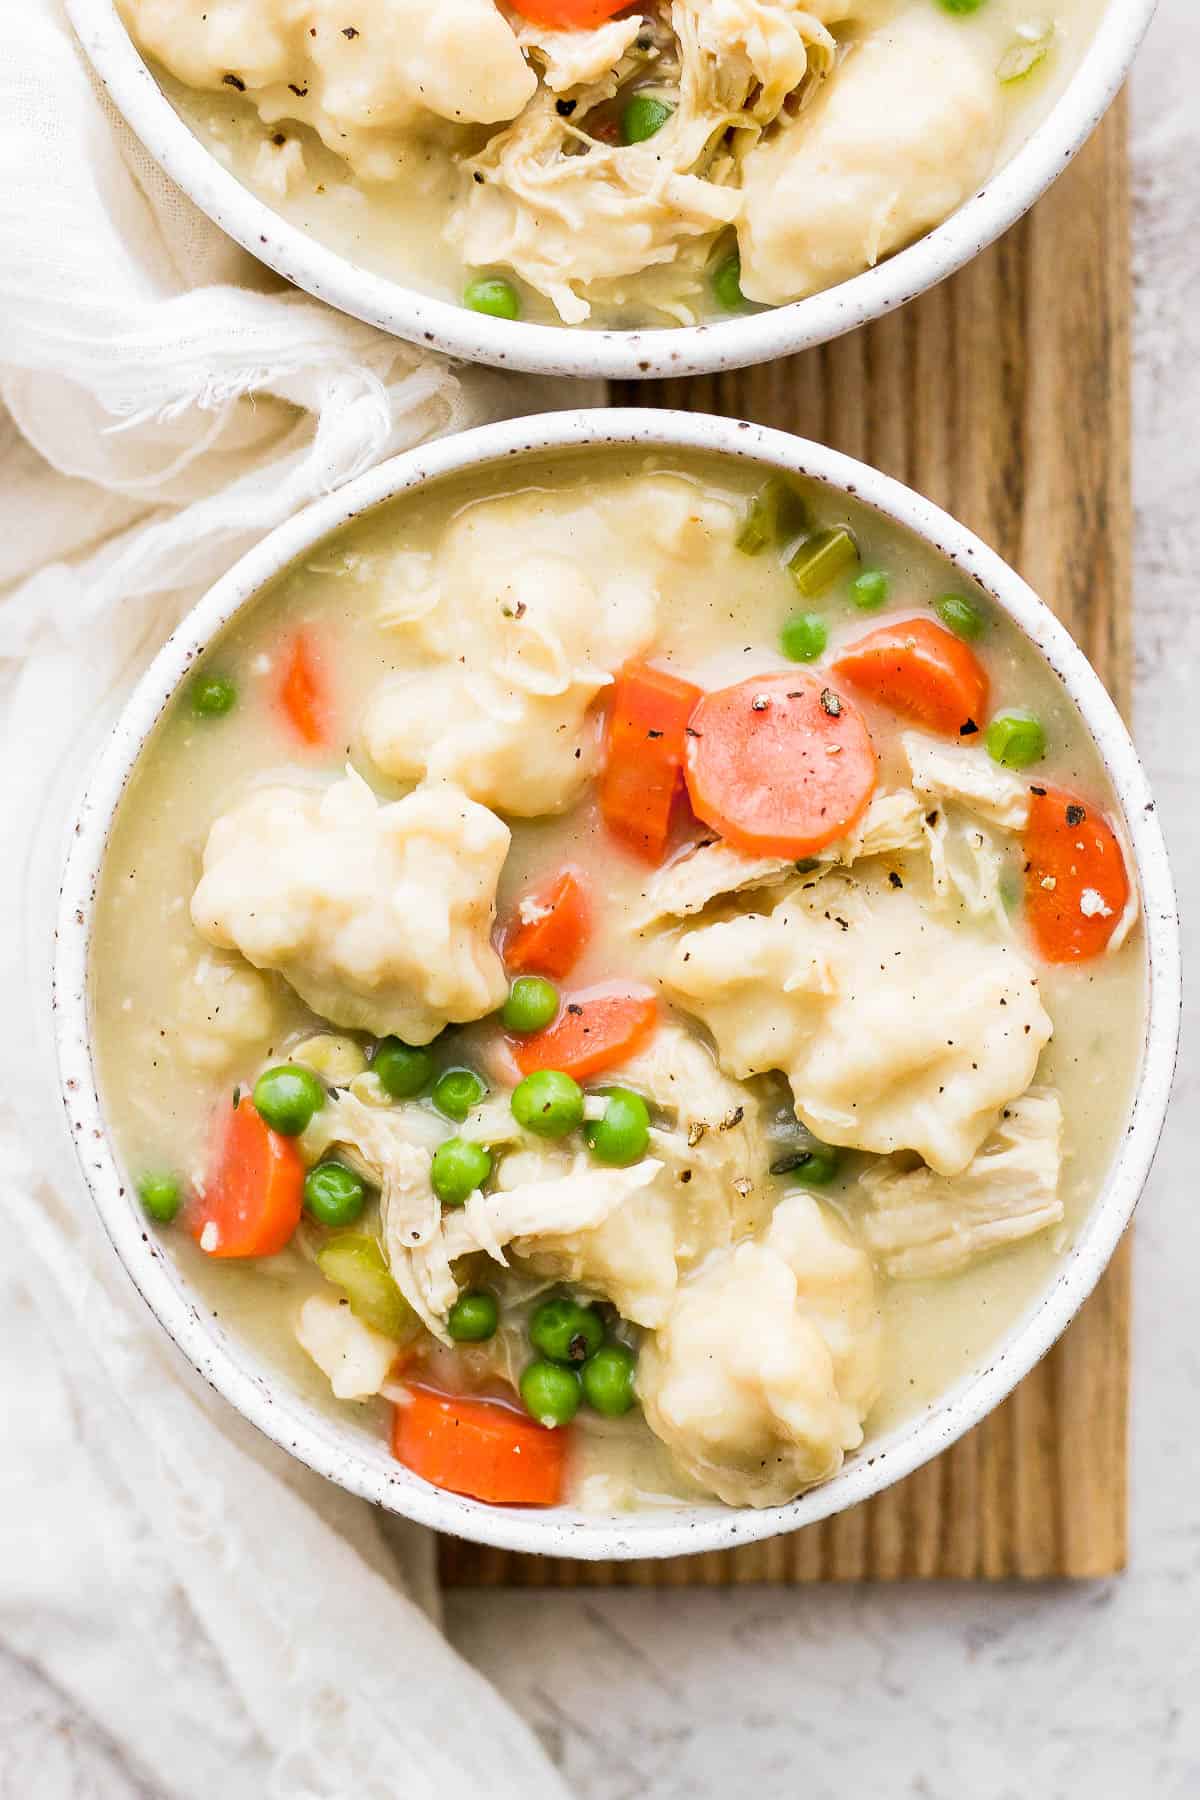 Bowls of chicken and dumpling soup on a wooden board.